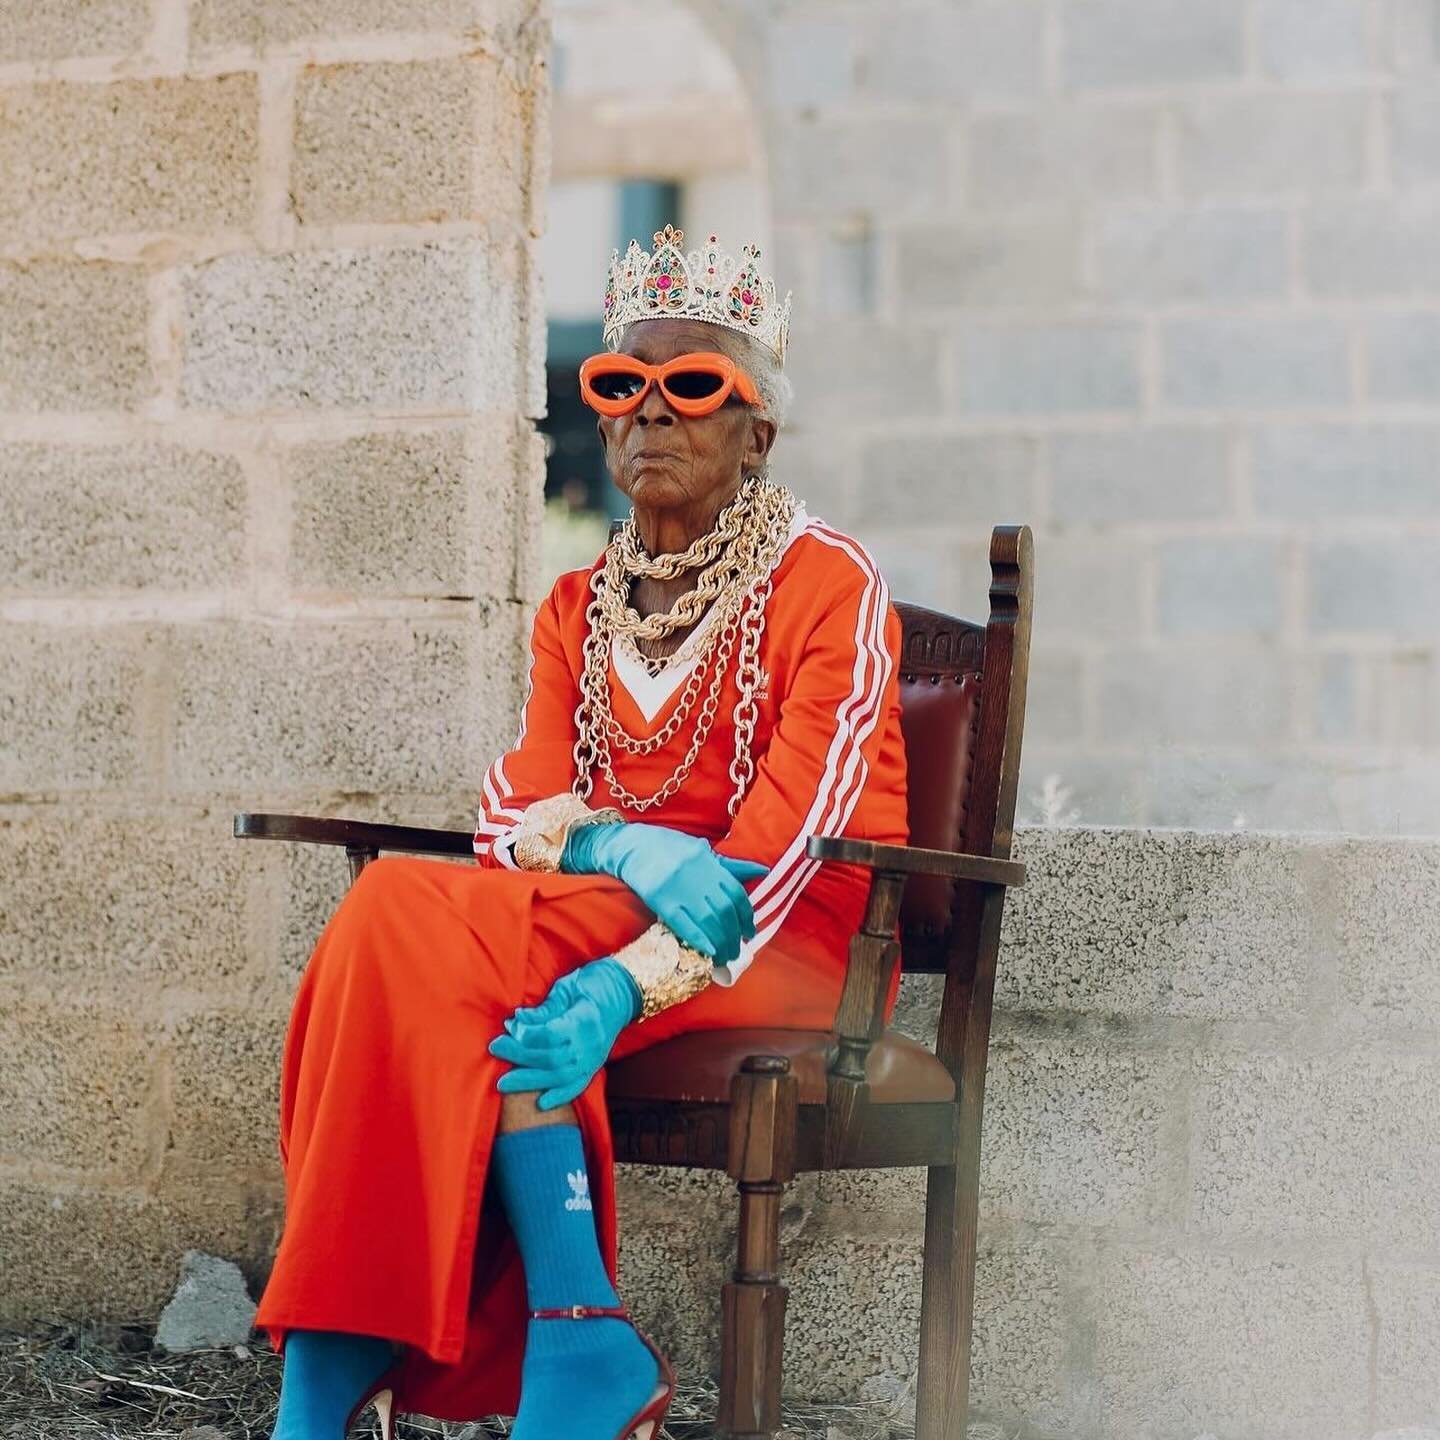 Just some bold and beautiful stylistic inspiration from @thevintagepoint_ who styled her Grandma on their land in Zambia 💛 | @legendary_glamma 
.
.
.
#style #grandma #zambia #streetstyle #bold #inspiration #vintage #culture #selfcaresunday